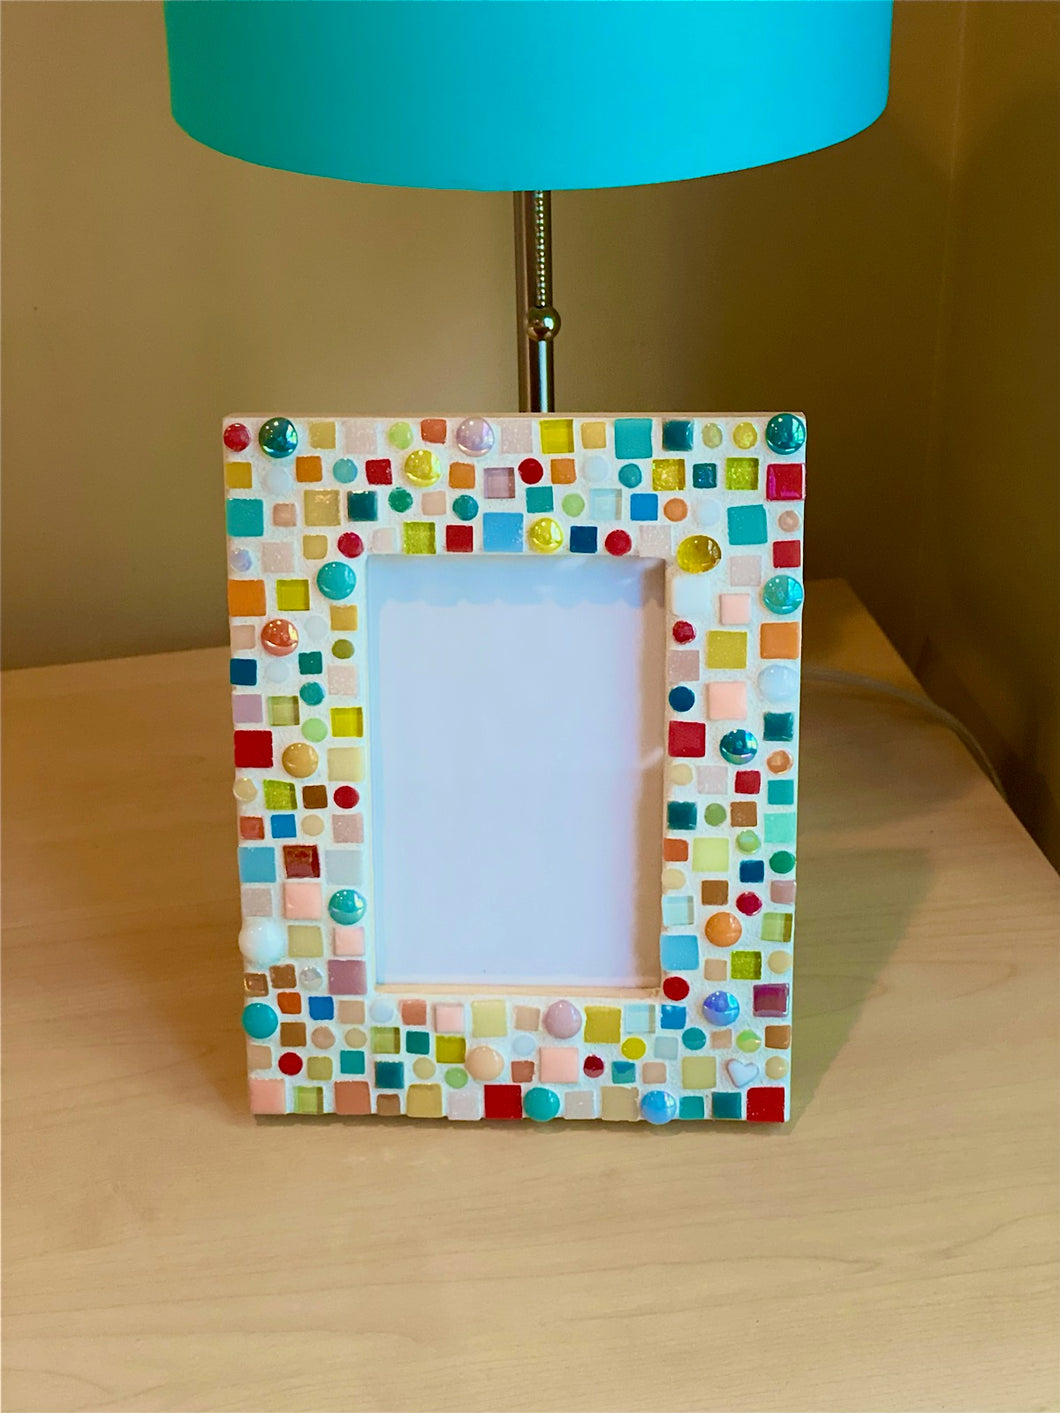 Make Your Own Mosaic Picture Frame Kit